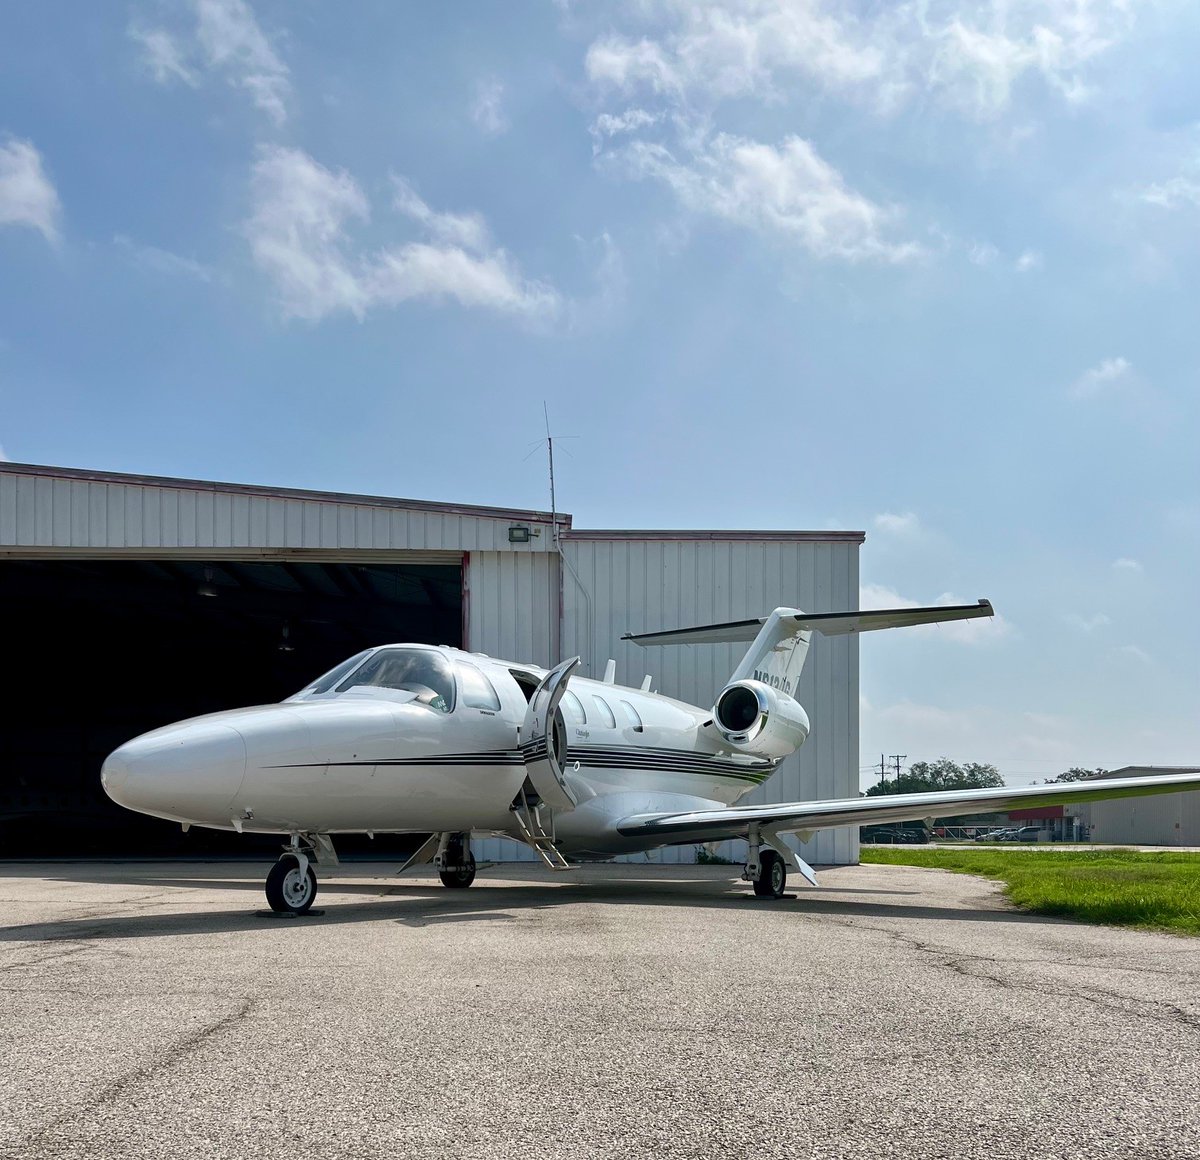 Refreshed and ready for its next mission, book your charter on our Citation light jet today ✈🔆

#planesmart #aviation #citation #lightjet #textronaviation #privatejet #jetcharter